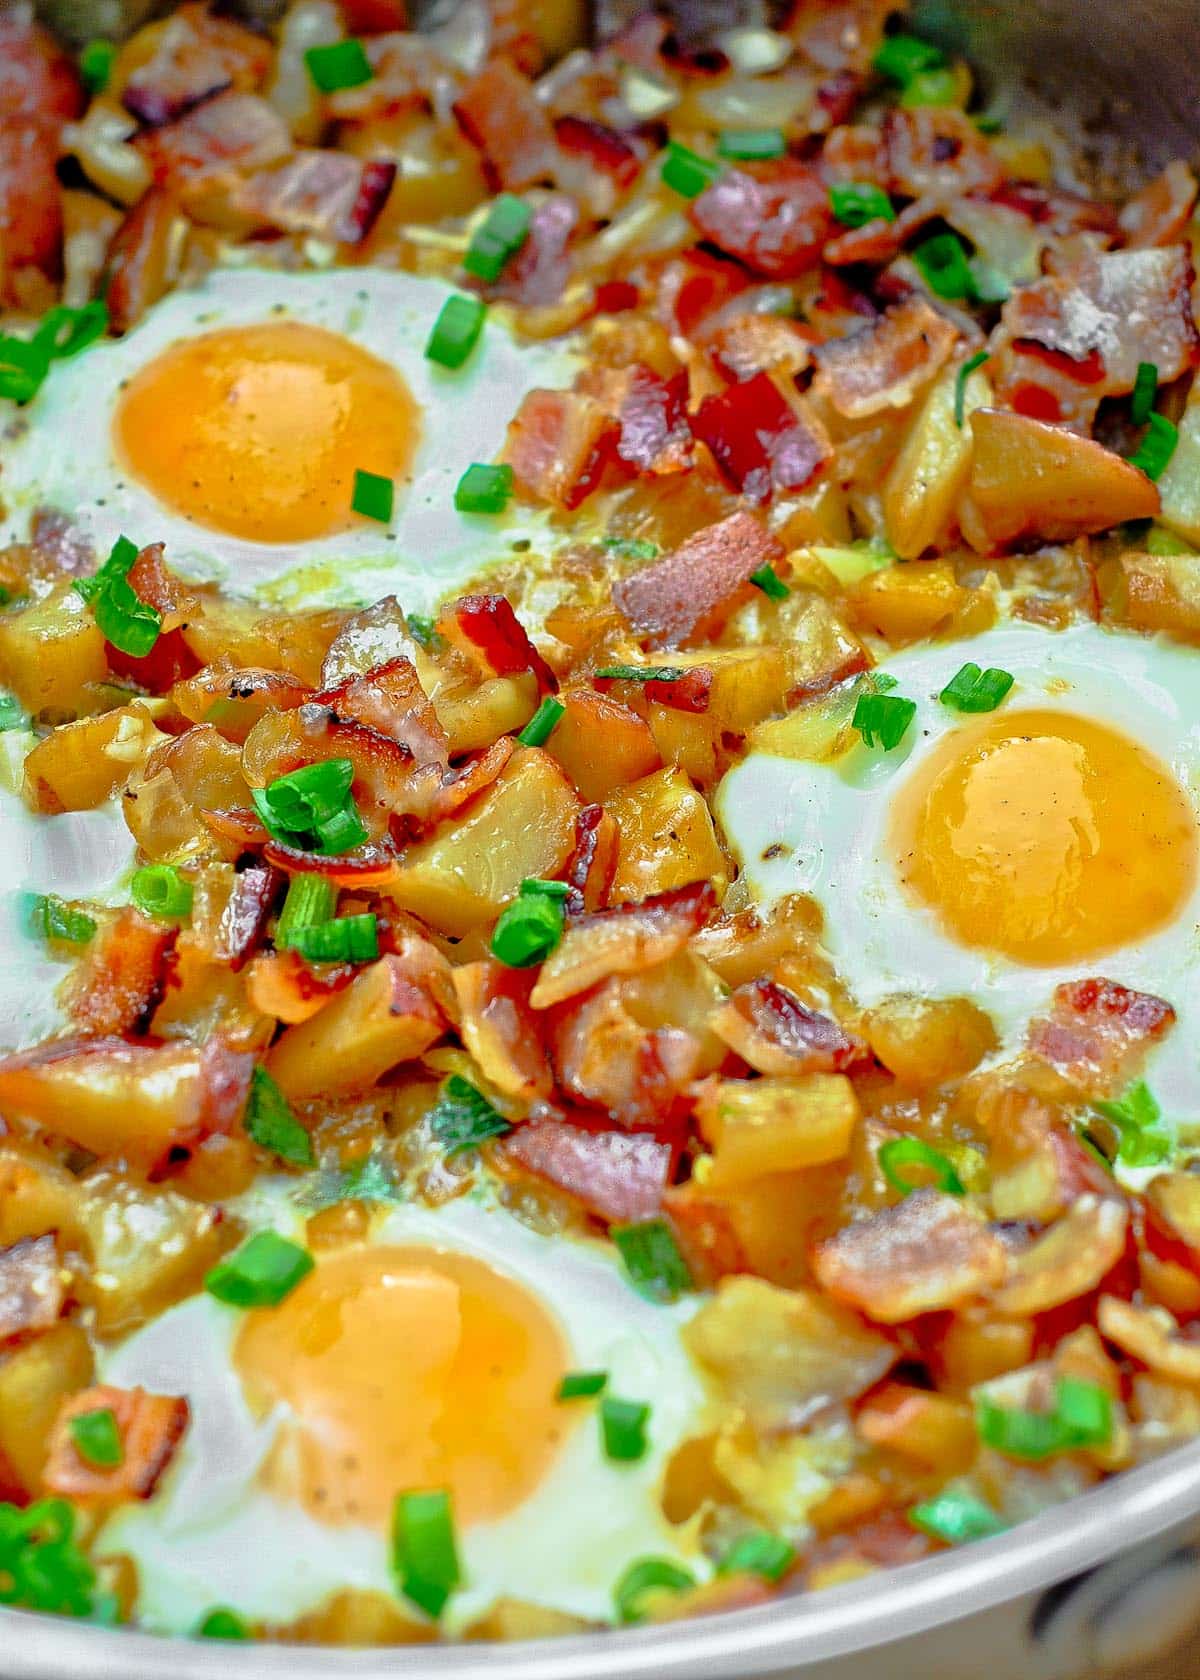 Bacon, Egg, Potato and Cheese Breakfast Skillet 